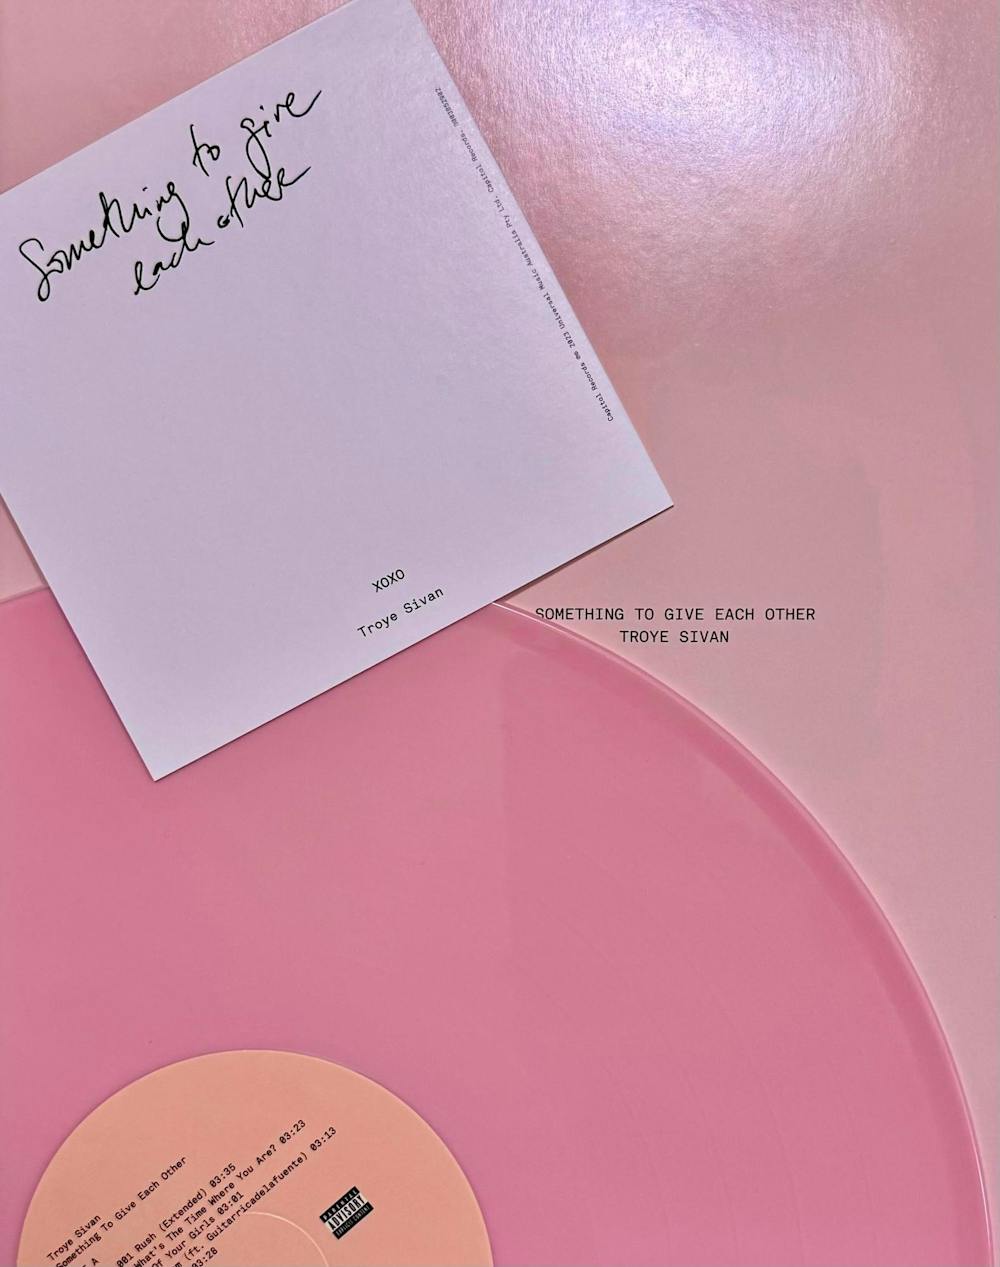 The signed vinyl cover of Troye Sivan's new album called "Something To Give Each Other." Part of hot pink vinyl is visible on a light pink background. On top of the vinyl is a lavender rectangle with the words "XOXO Troye Sivan" on it. The album title is on the light pink background. 